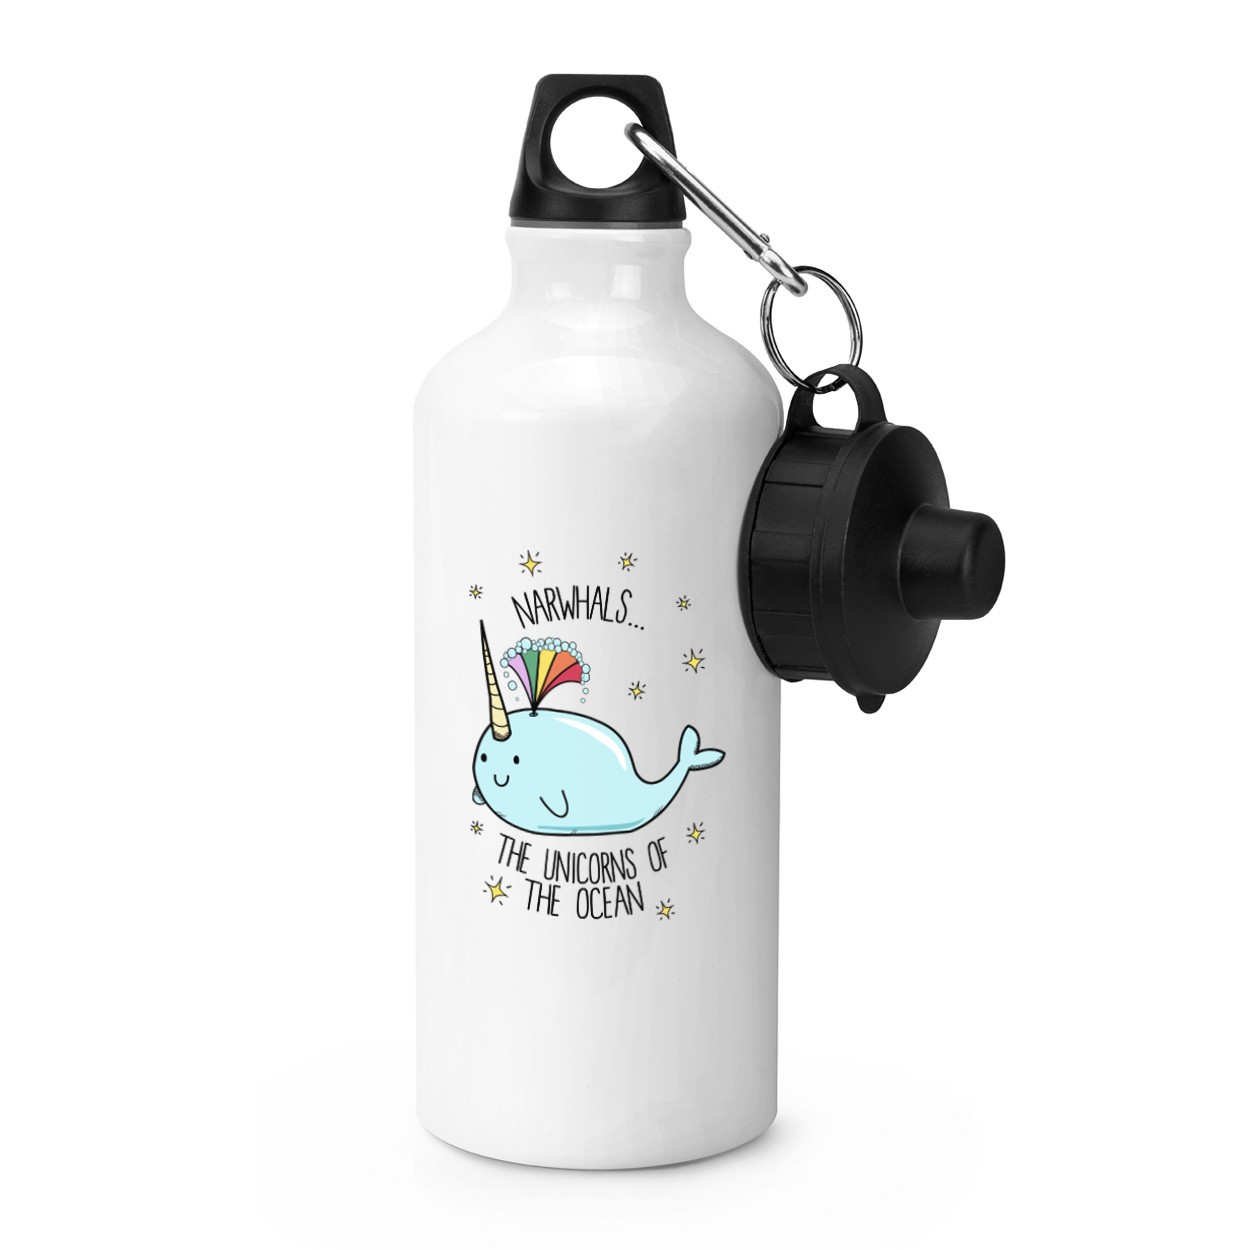 Narwhals The Unicorns Of The Ocean Sports Bottle